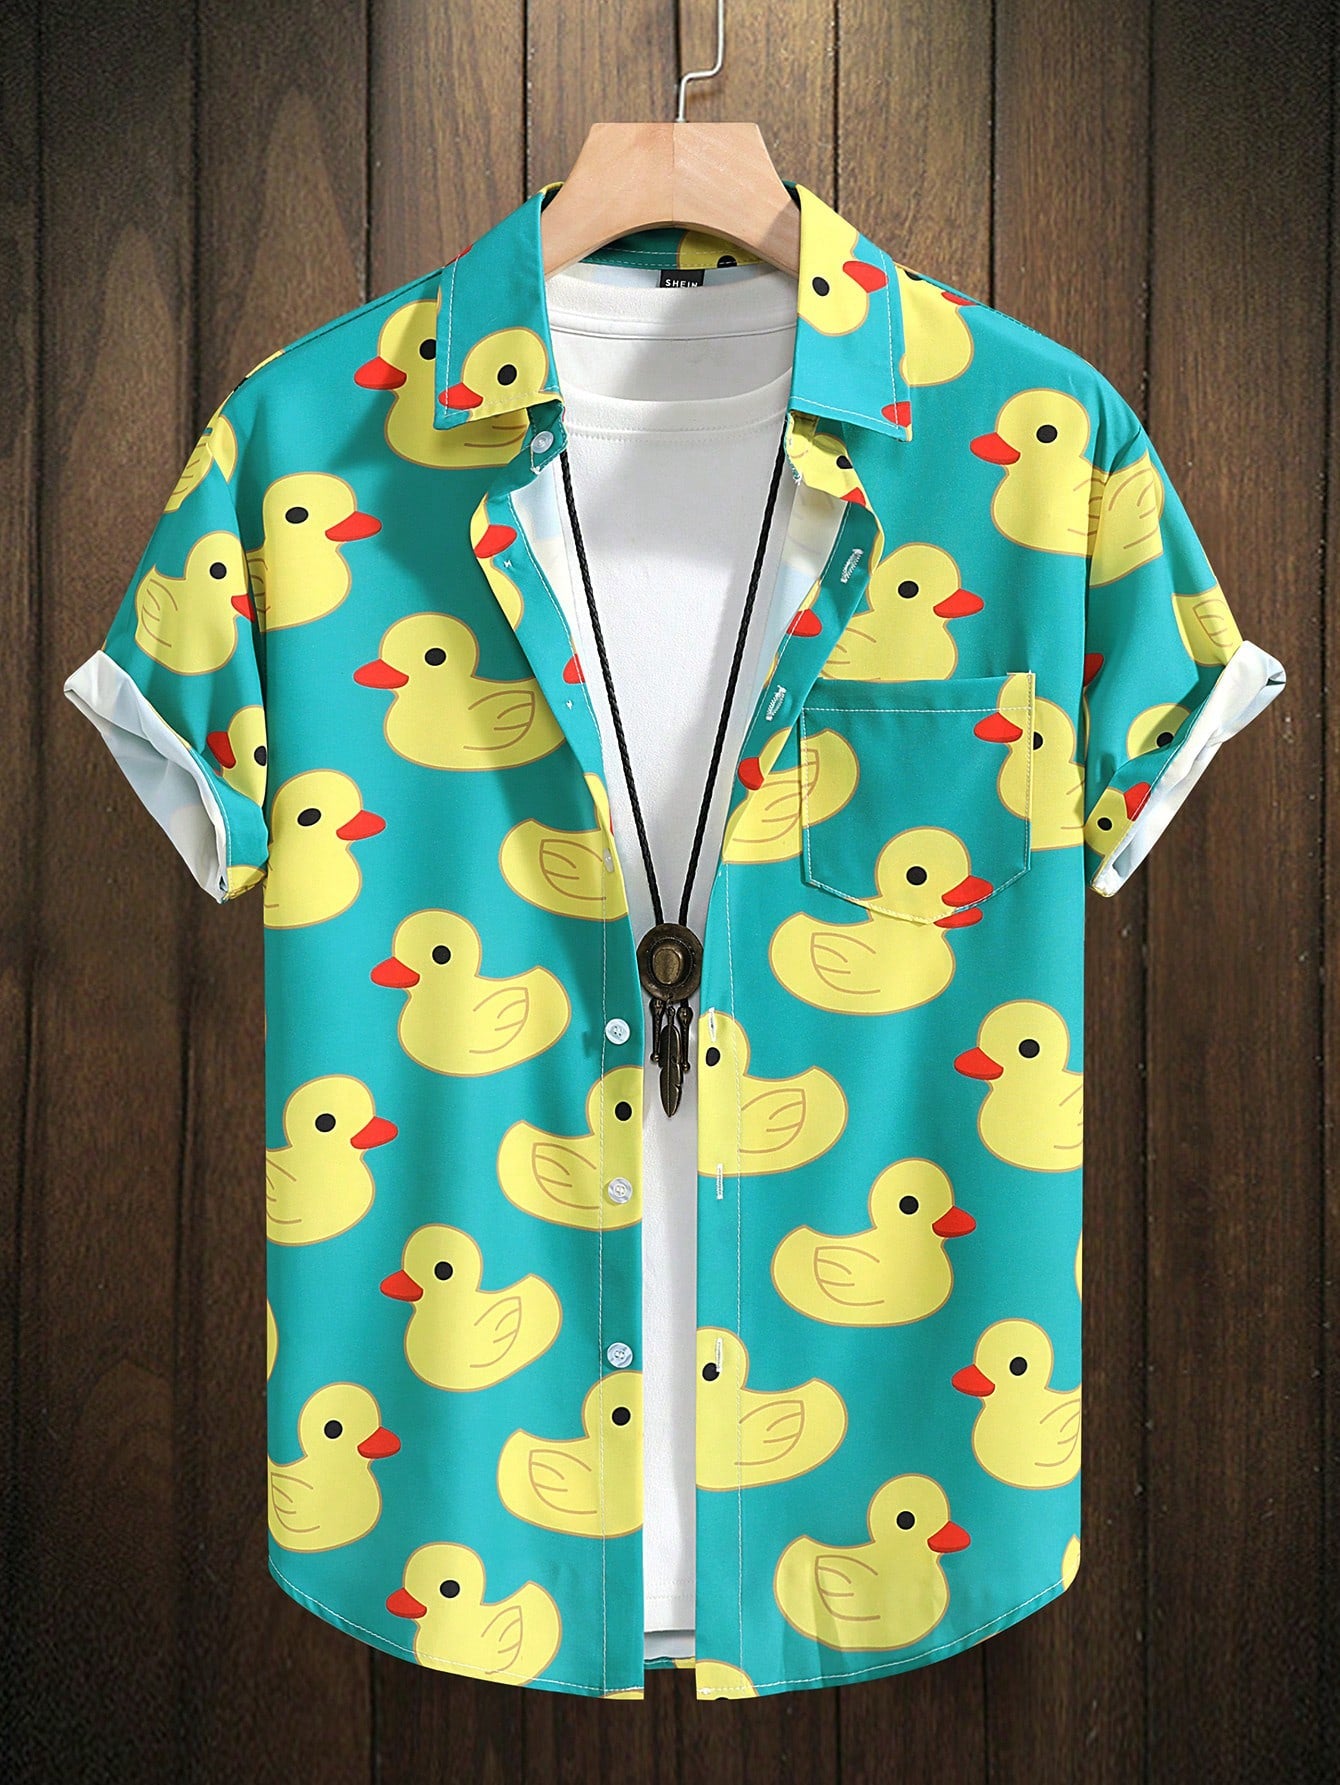 Manfinity Hypemode Men Duck Print Shirt Without Tee